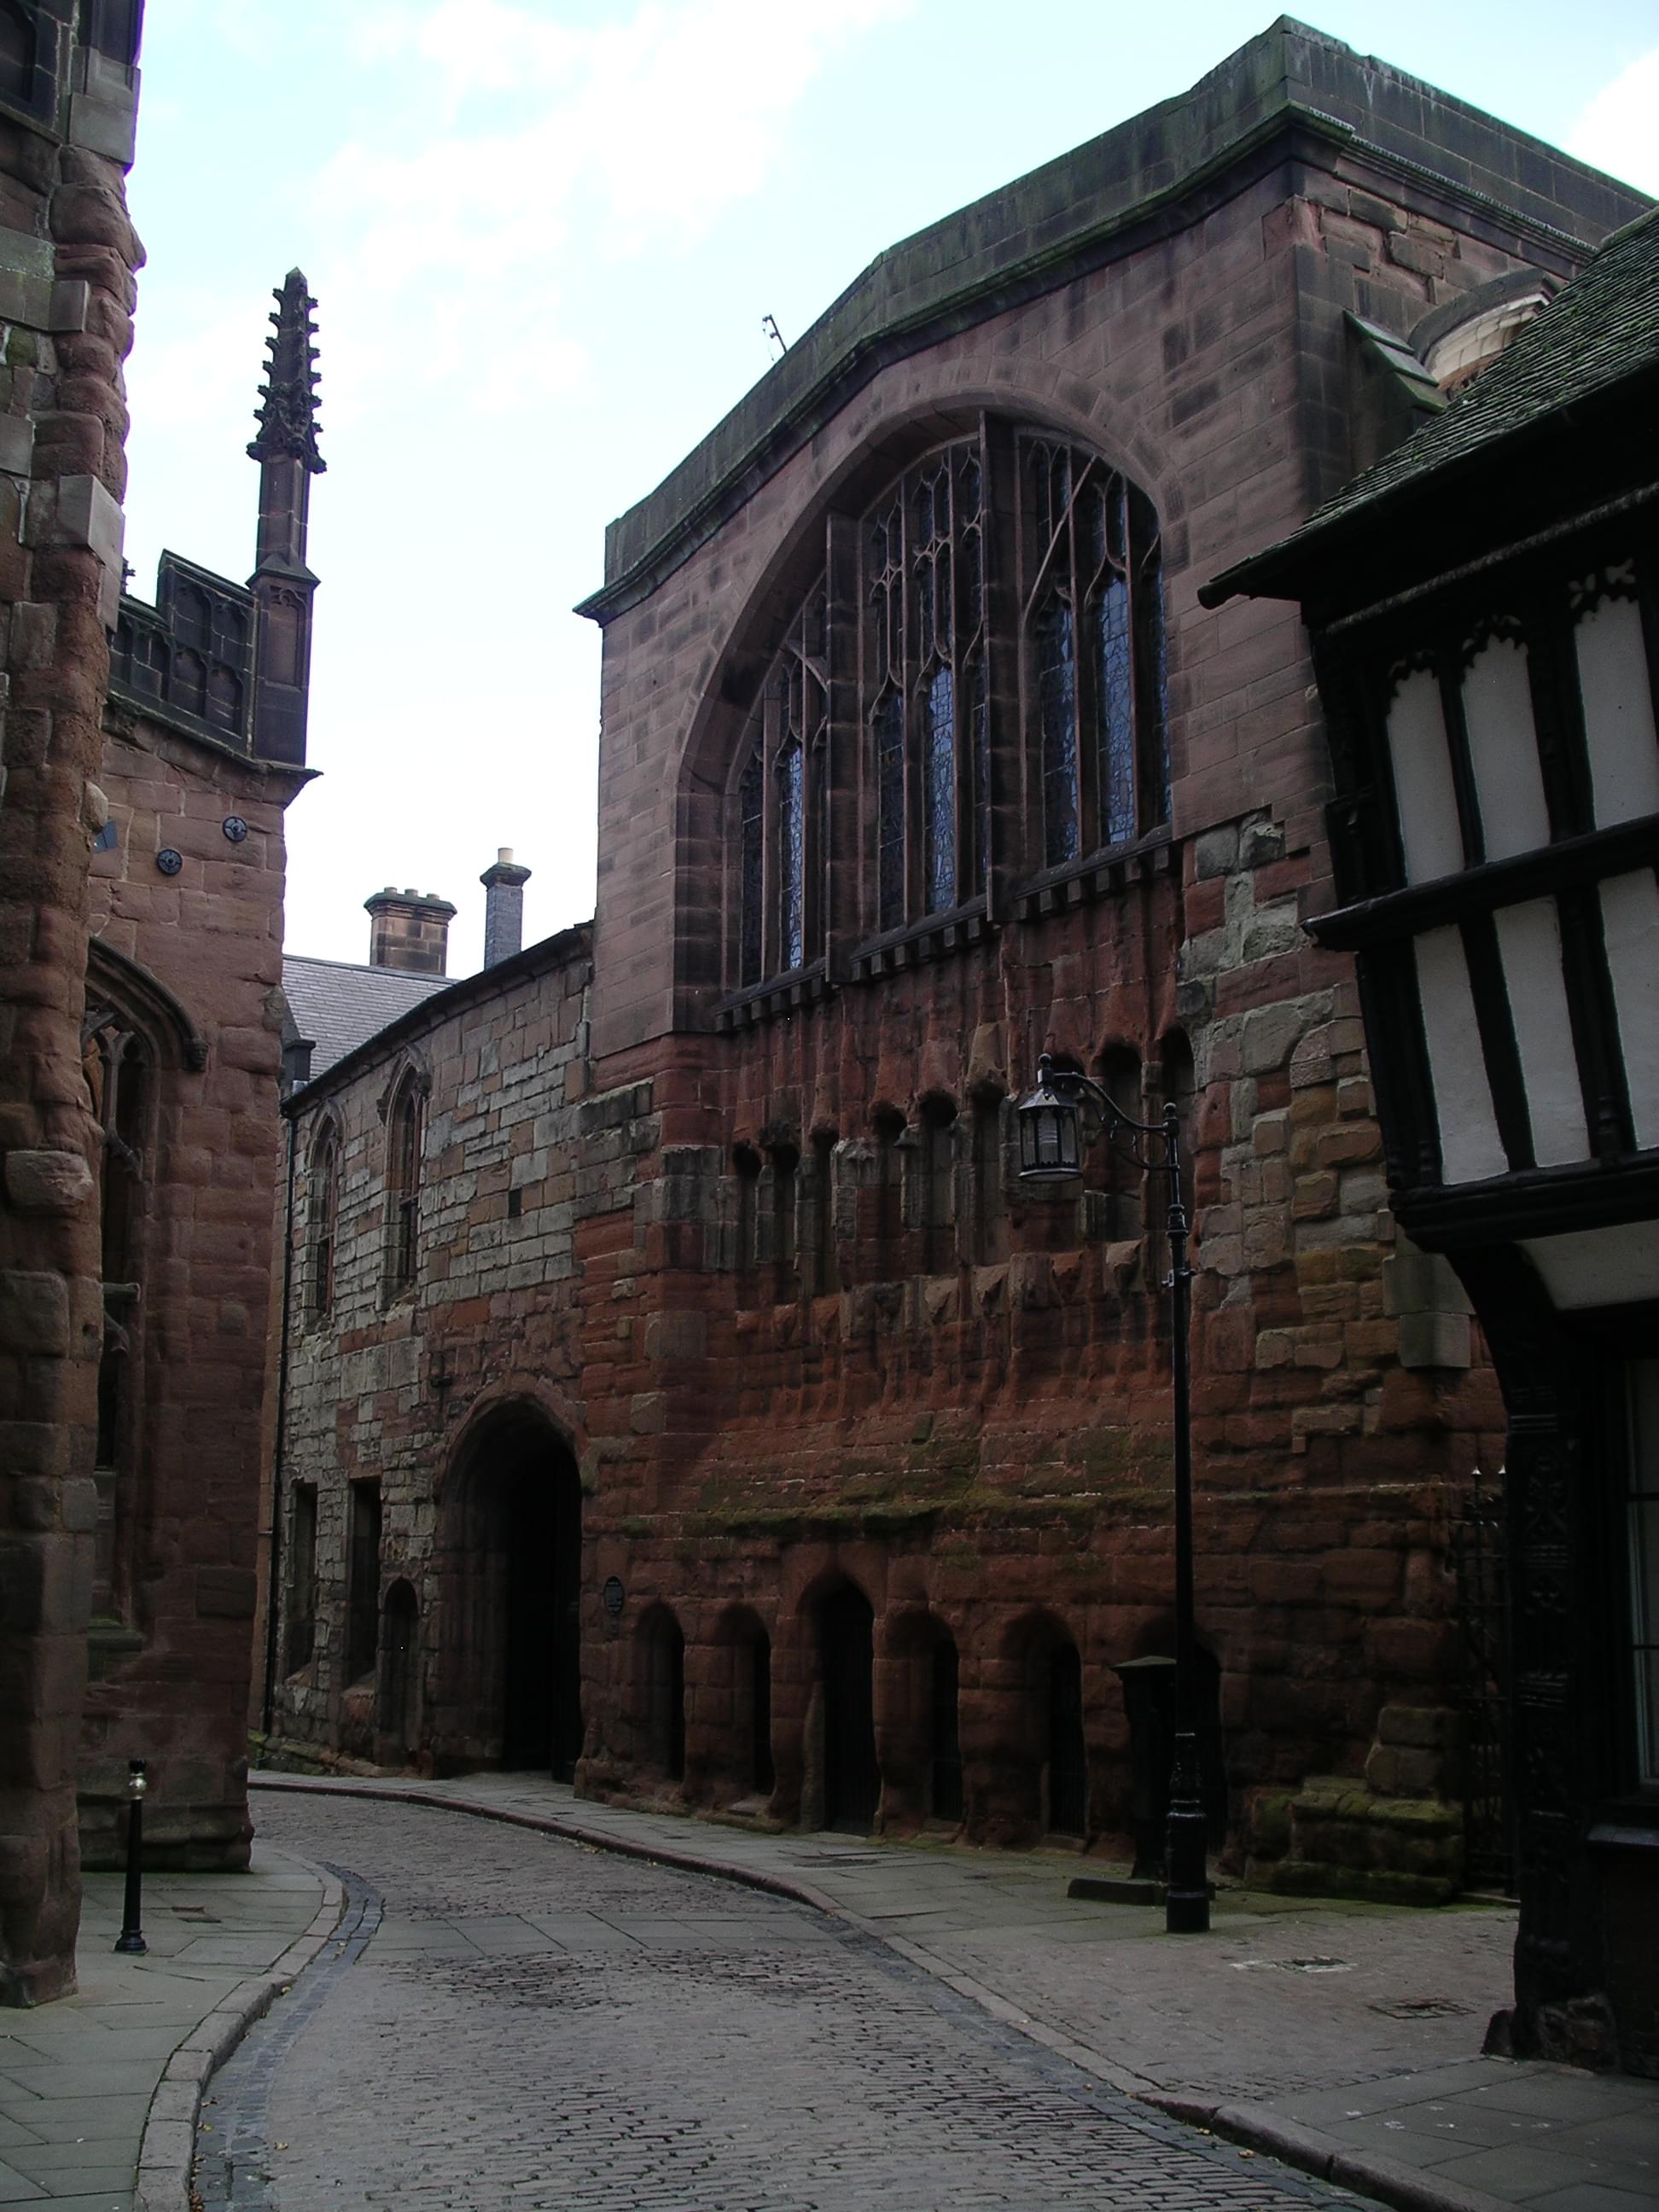 St. Mary's Guildhall Overview